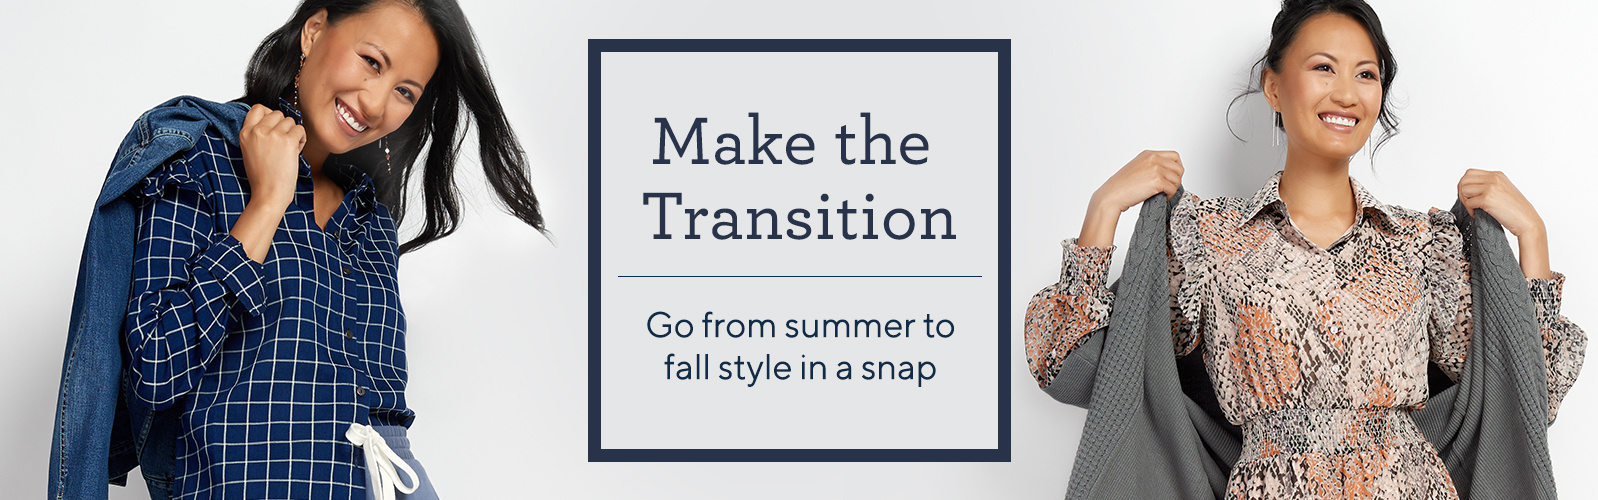 Make the Transition.  Go from summer to fall style in a snap.